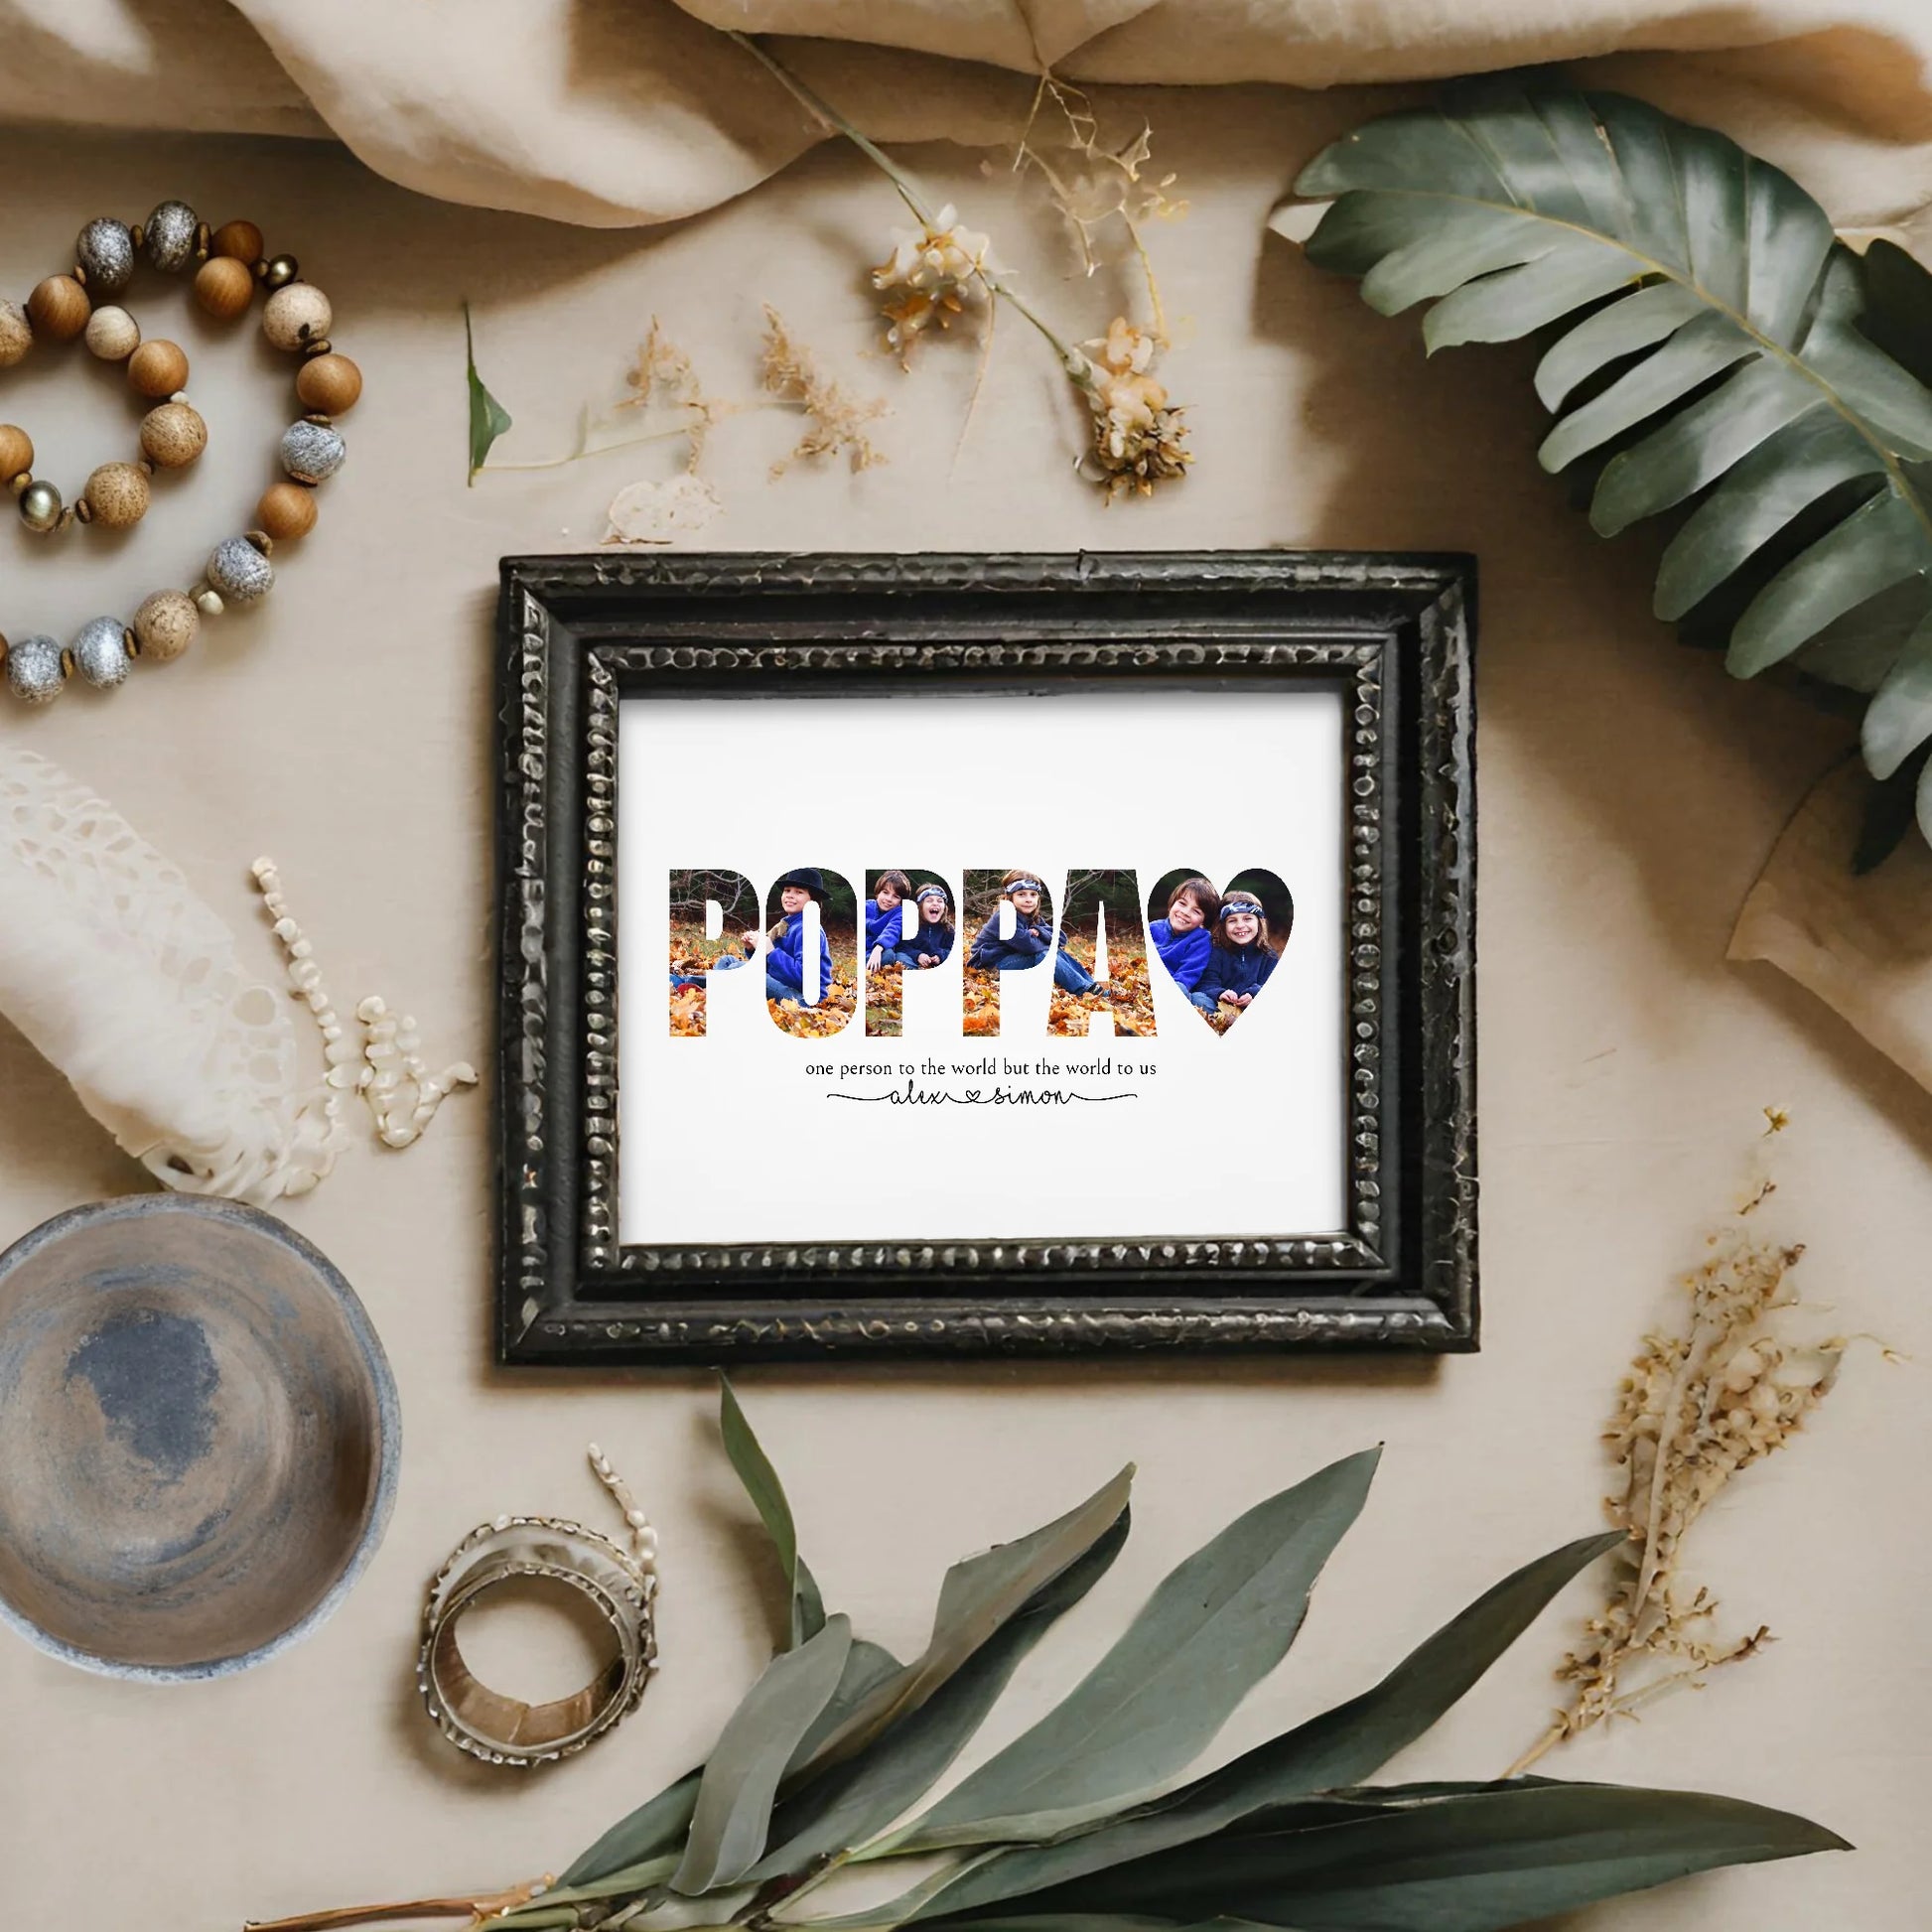 Poppa editable photo collage template last minute gift for grandpa by Playful Pixie Studio